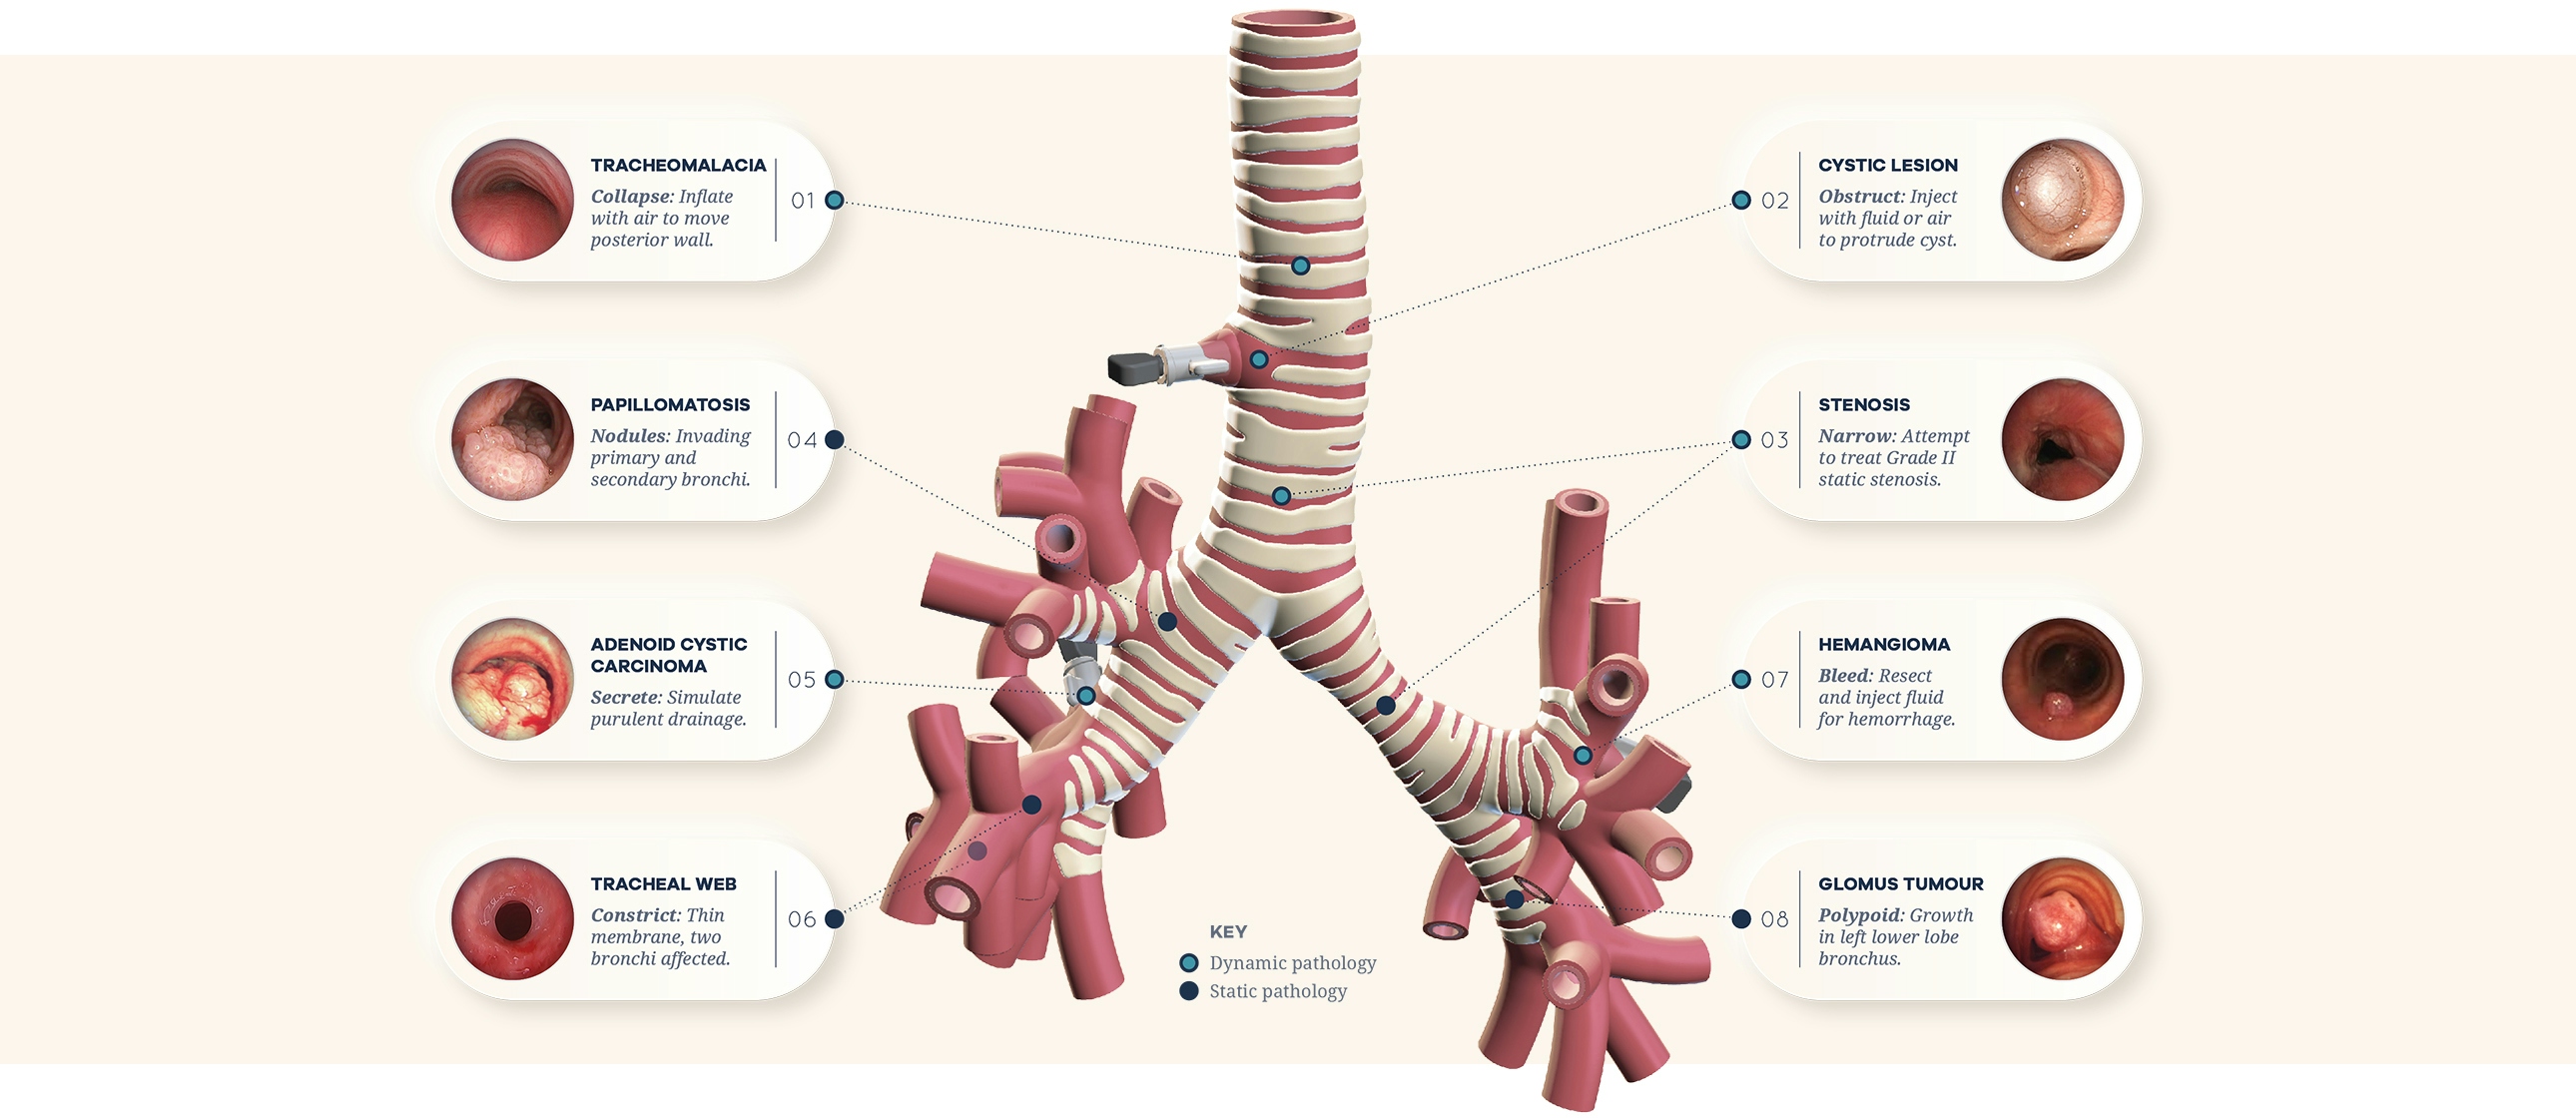 Diagram showing location and type of pathology inside trachea model.